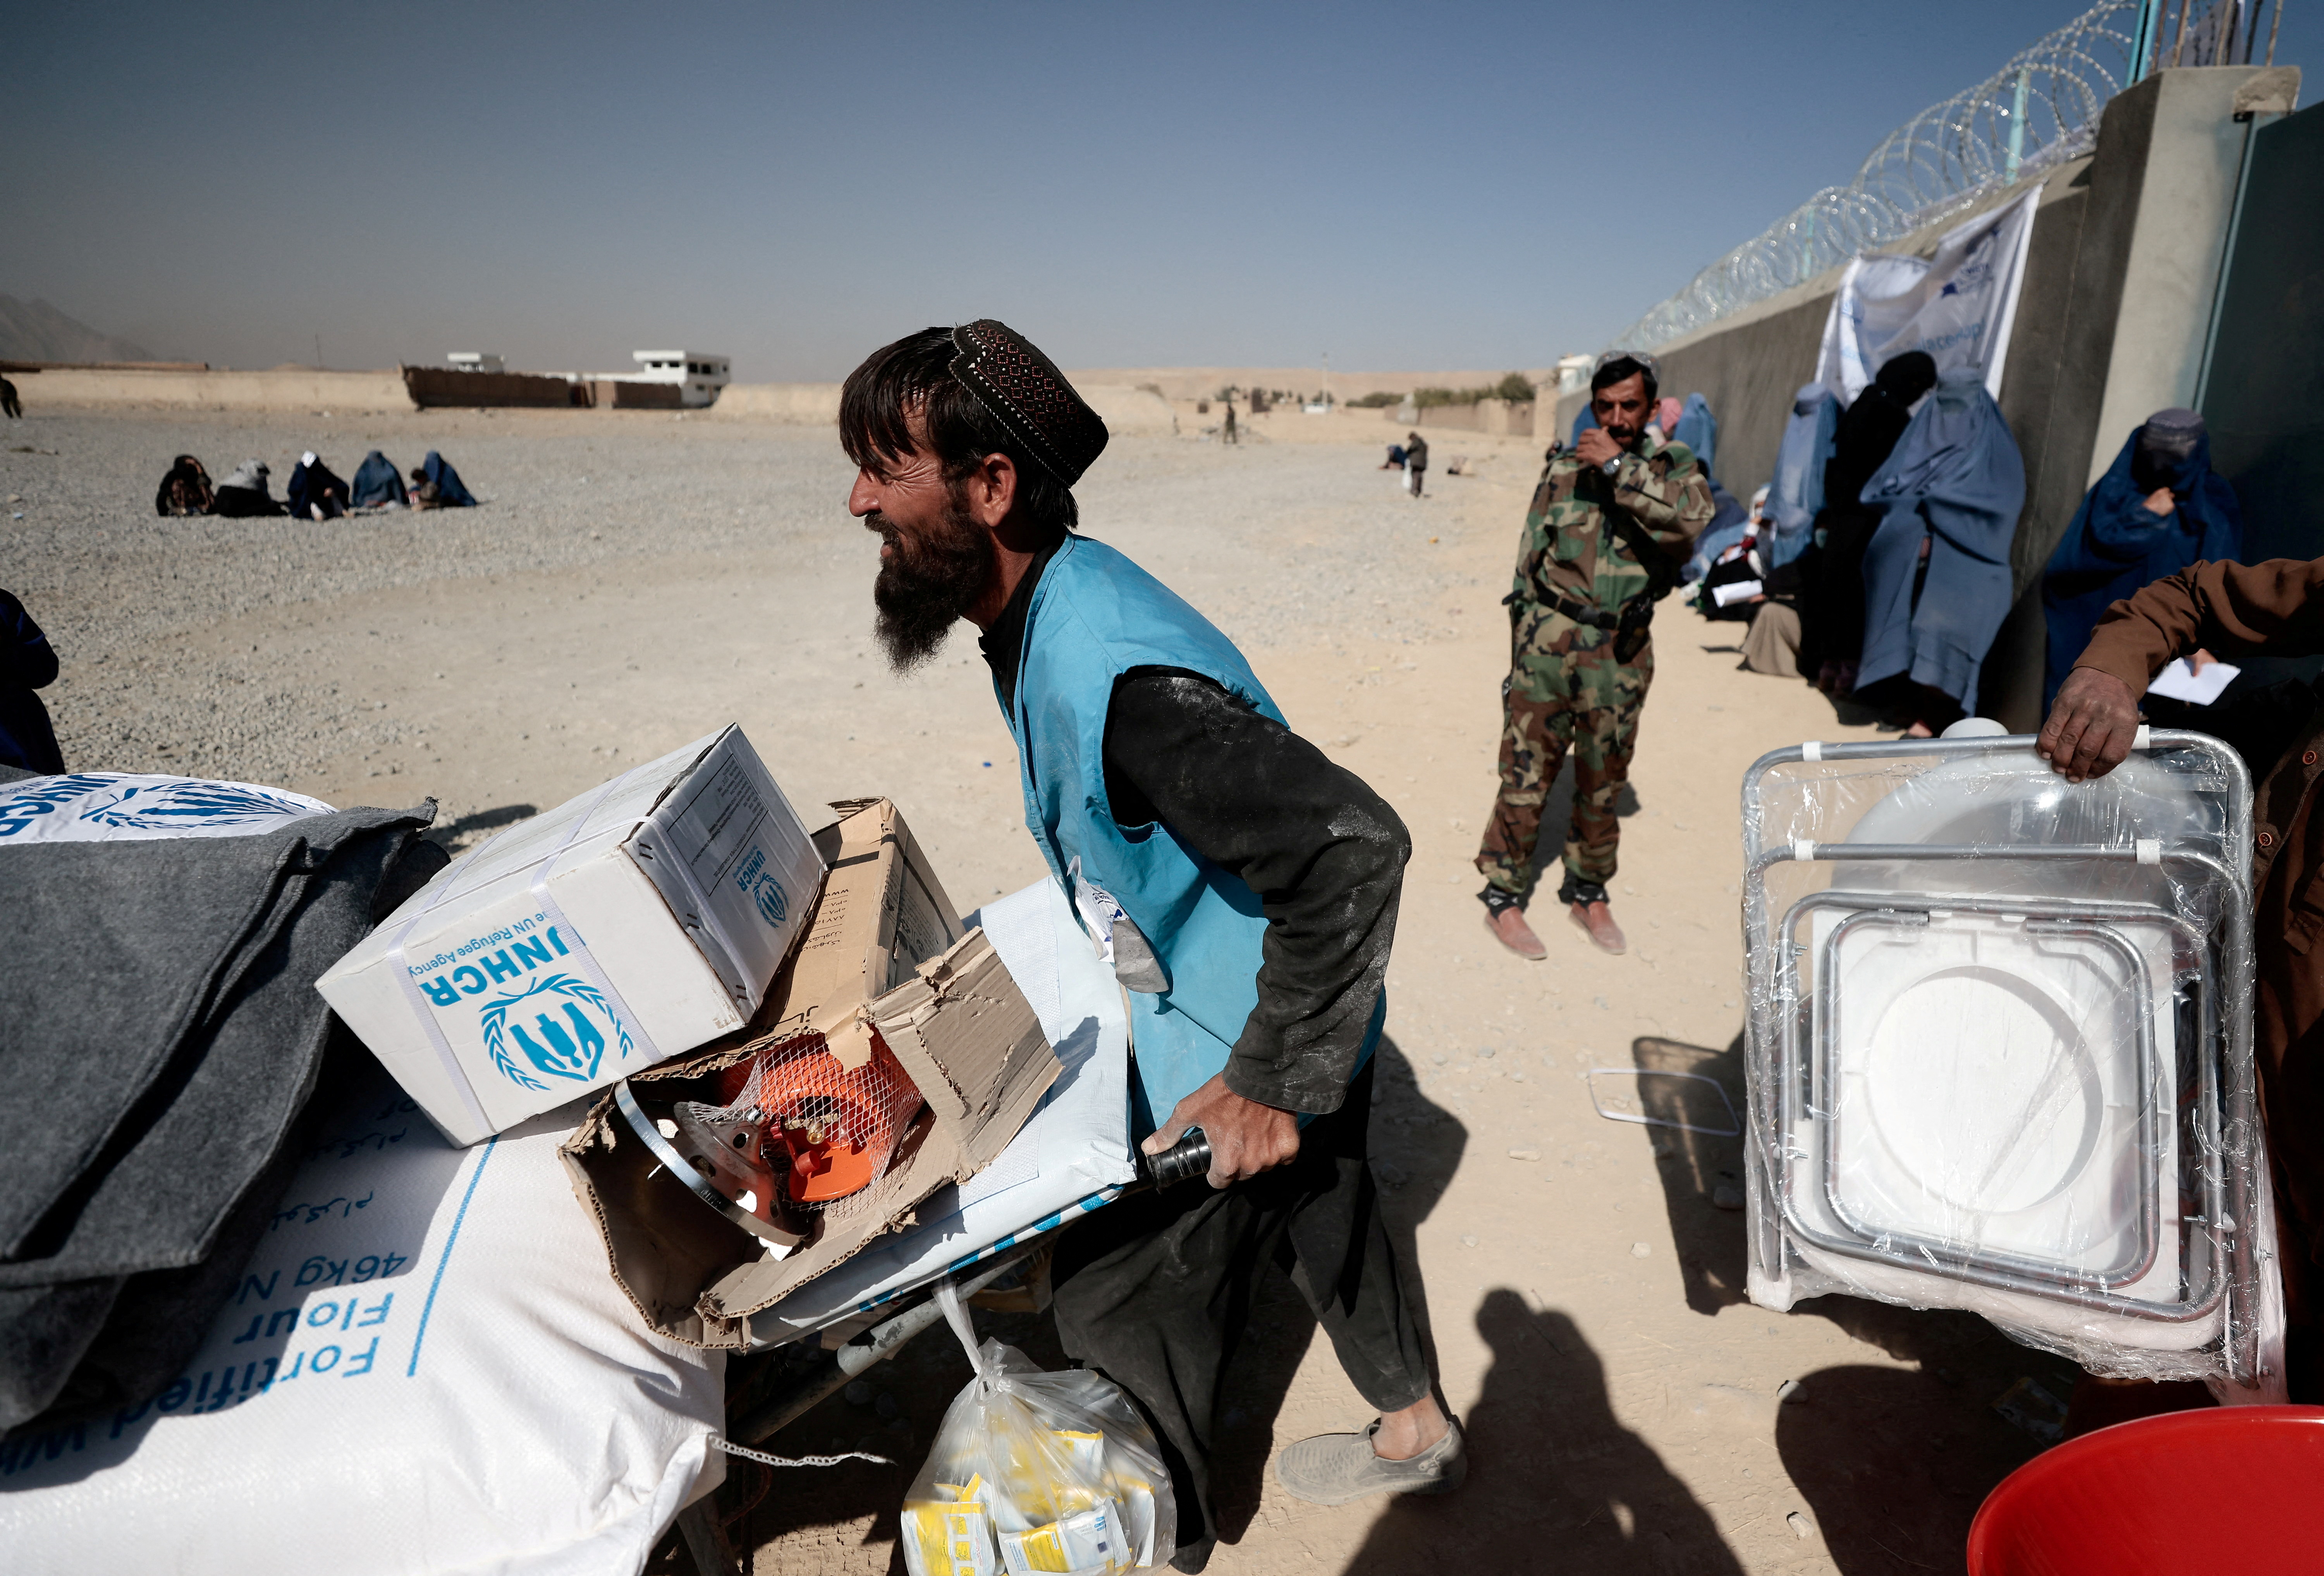 An UNHCR worker pushes a wheelbarrow loaded with aid supplies for a displaced Afghan family outside a distribution center as a Taliban fighter secures the area on the outskirts of Kabul, Afghanistan October 28, 2021. REUTERS/Zohra Bensemra/File Photo